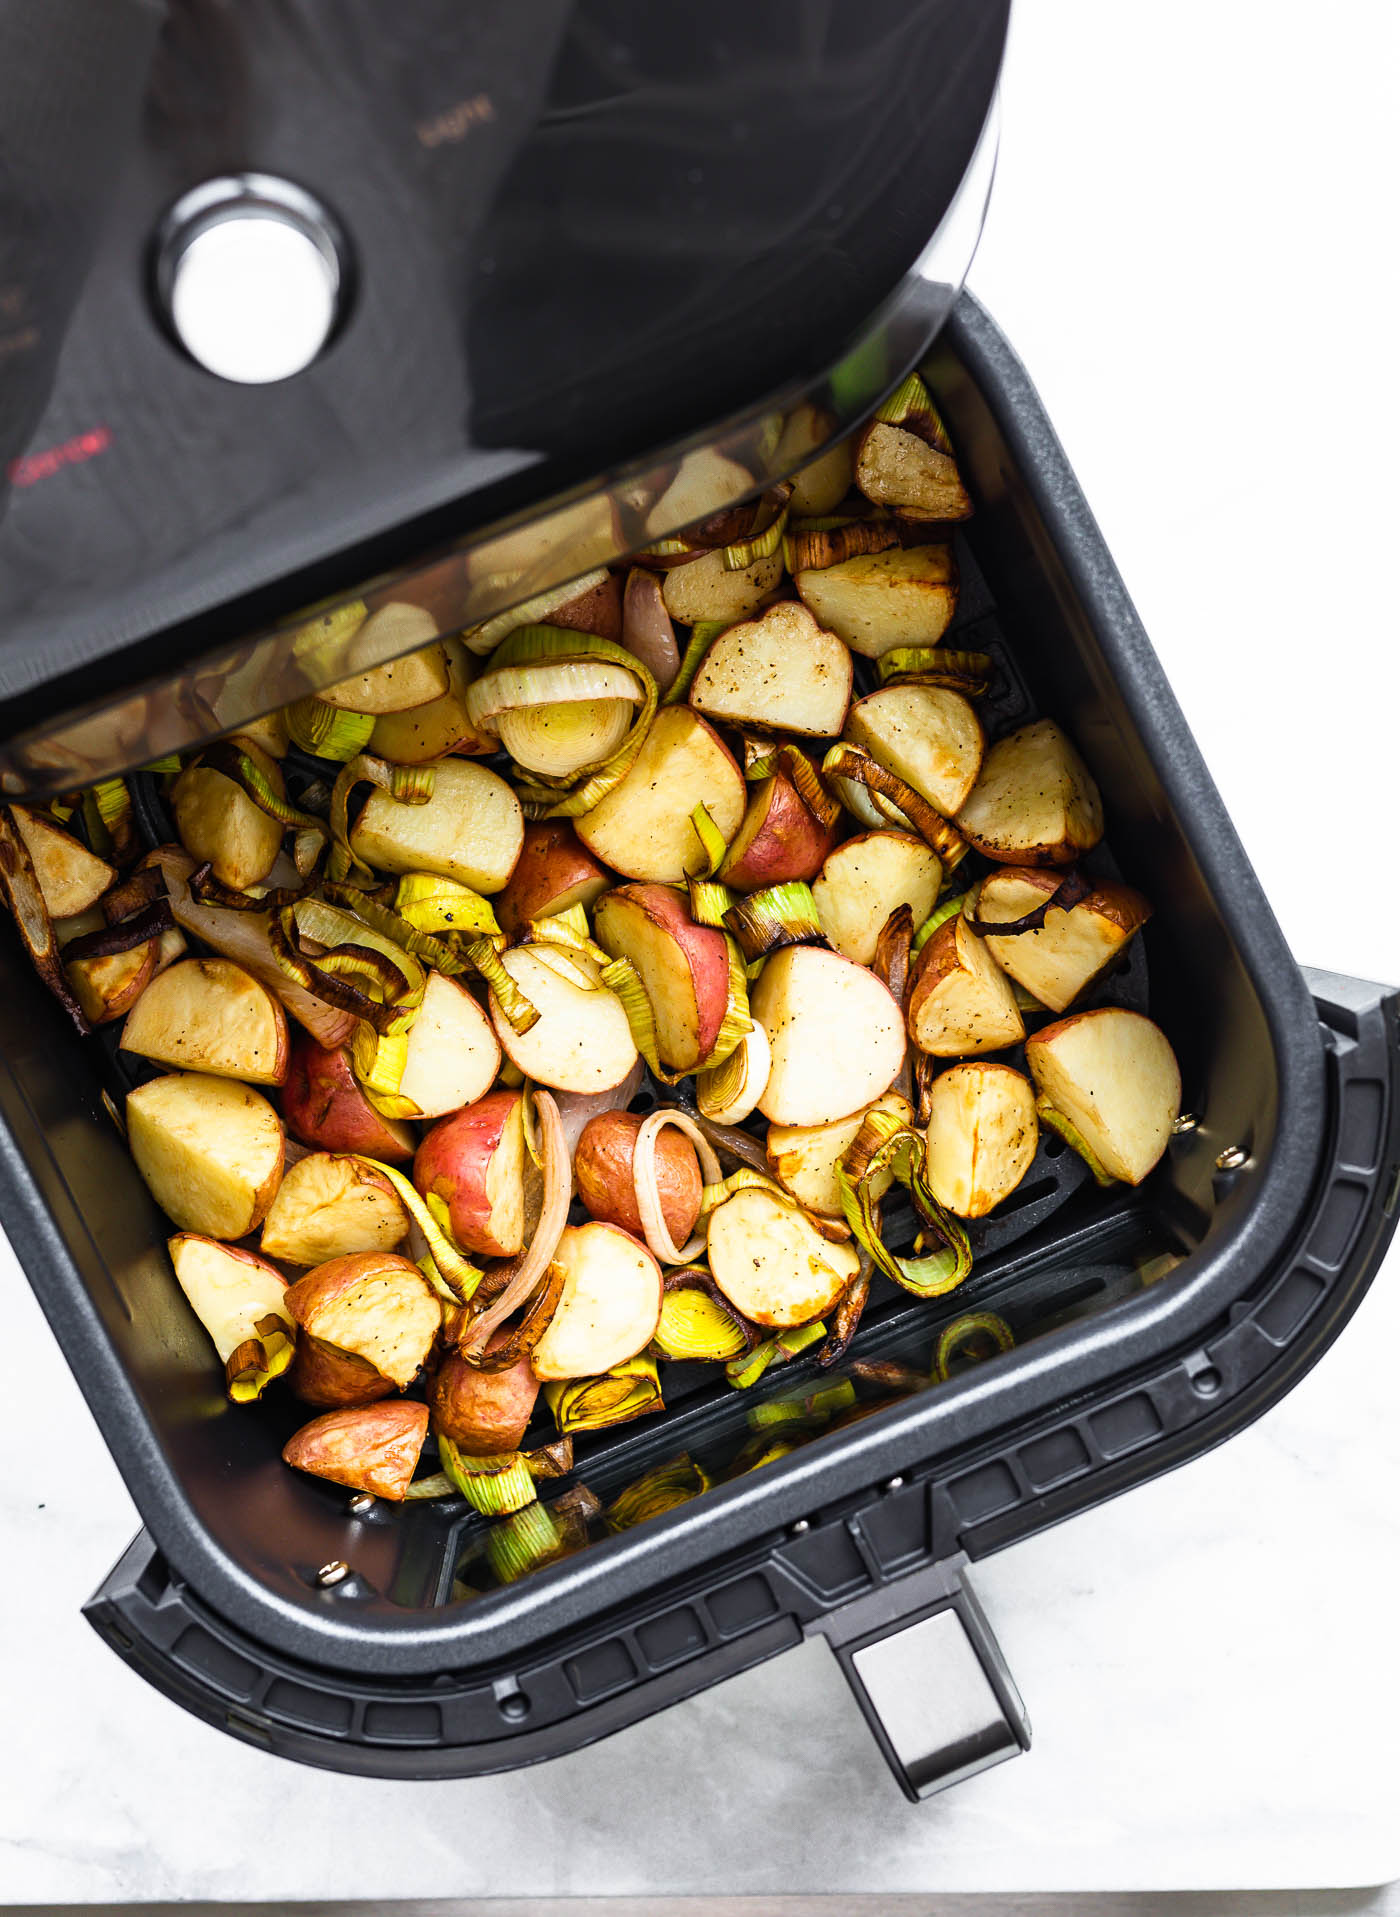 an air fryer basket sticking out of the air fryer full of roasted leeks and potatoes with onions